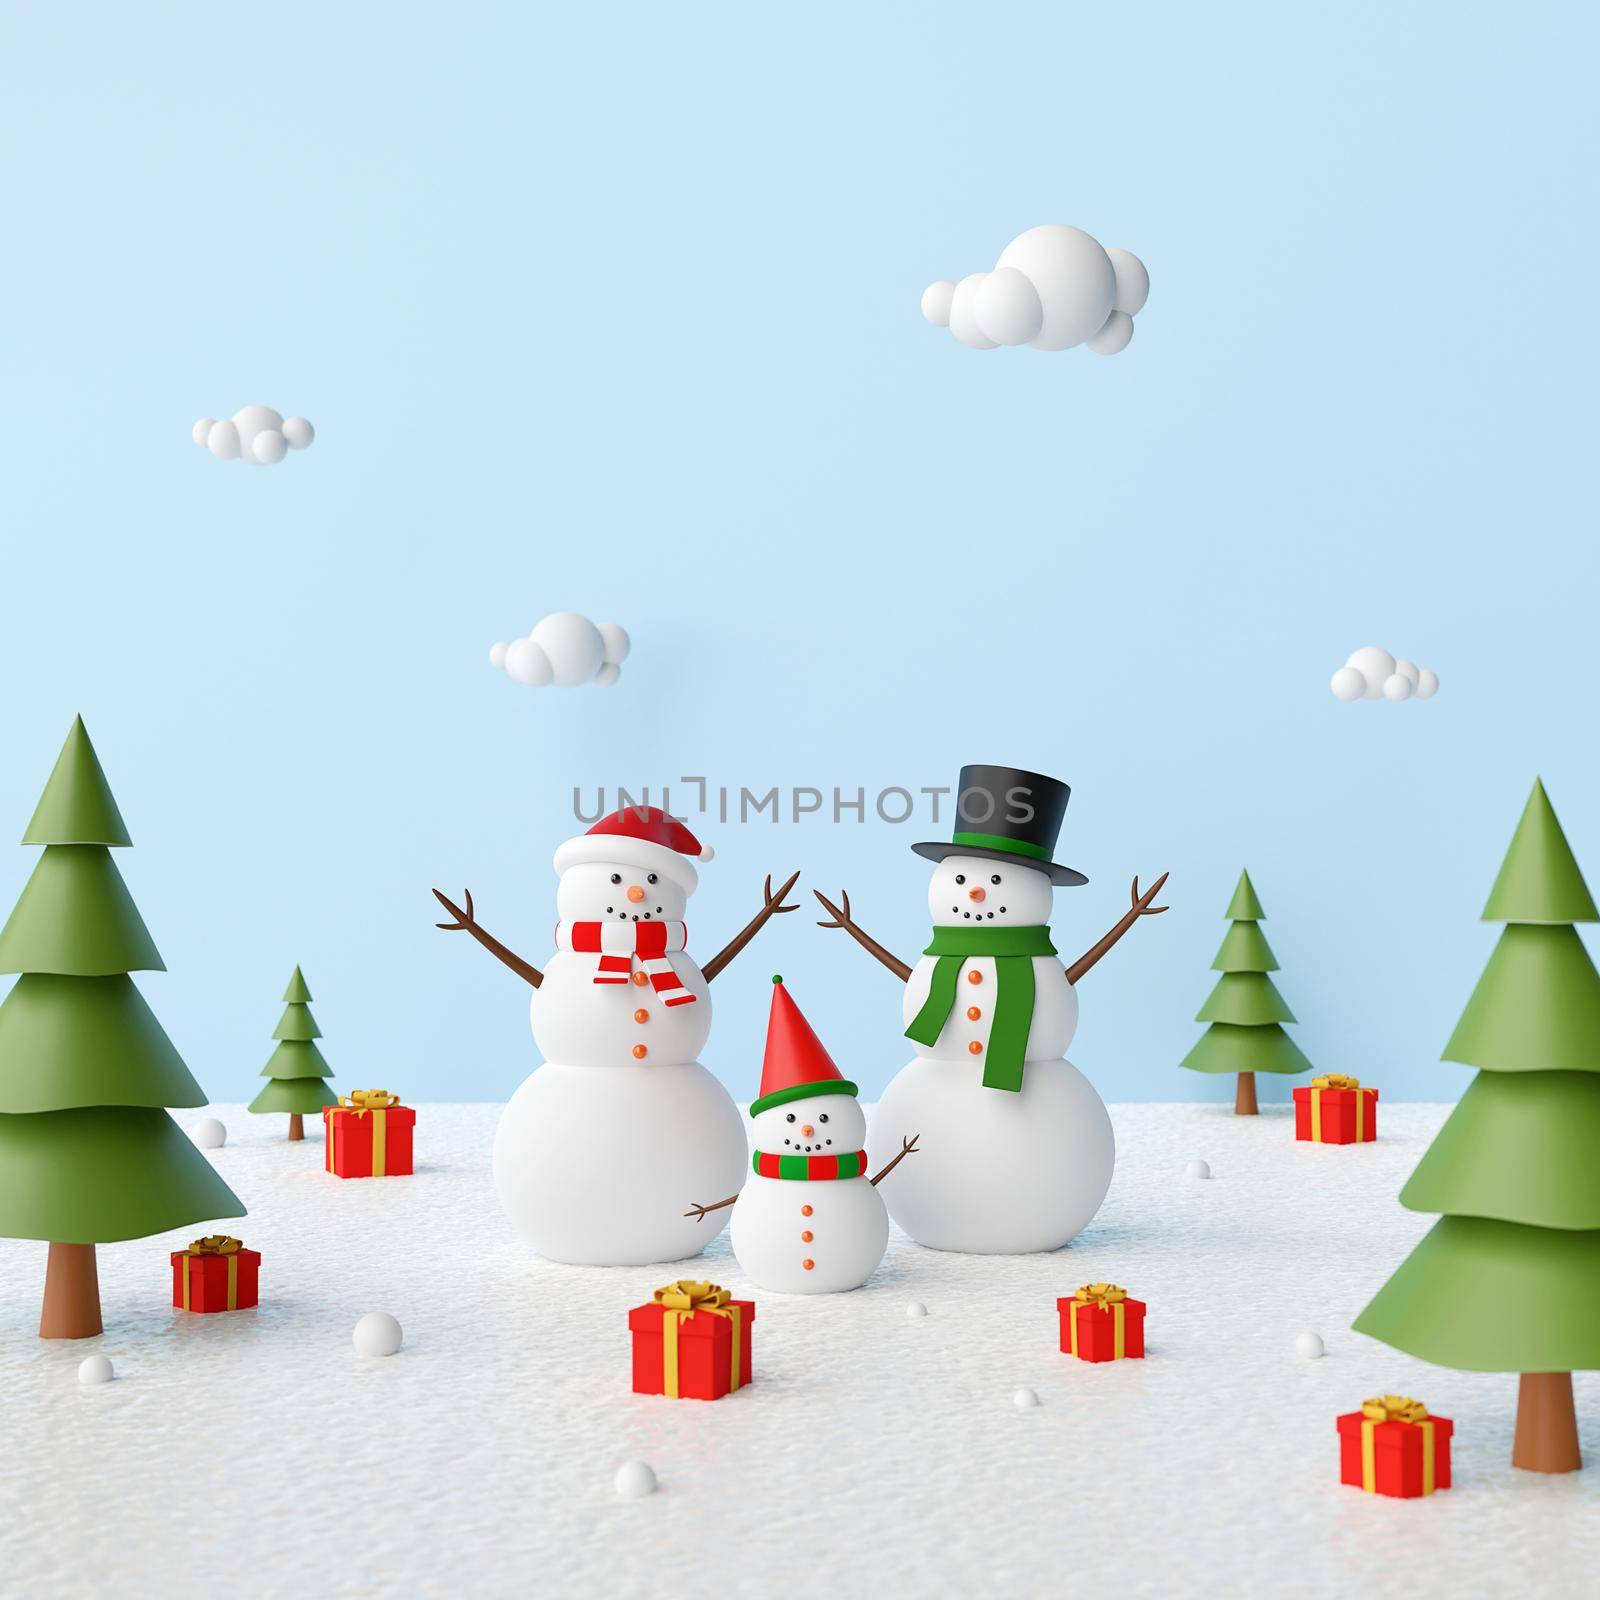 Merry Christmas, Snowman in a pine forest with Christmas gifts, 3d rendering by nutzchotwarut